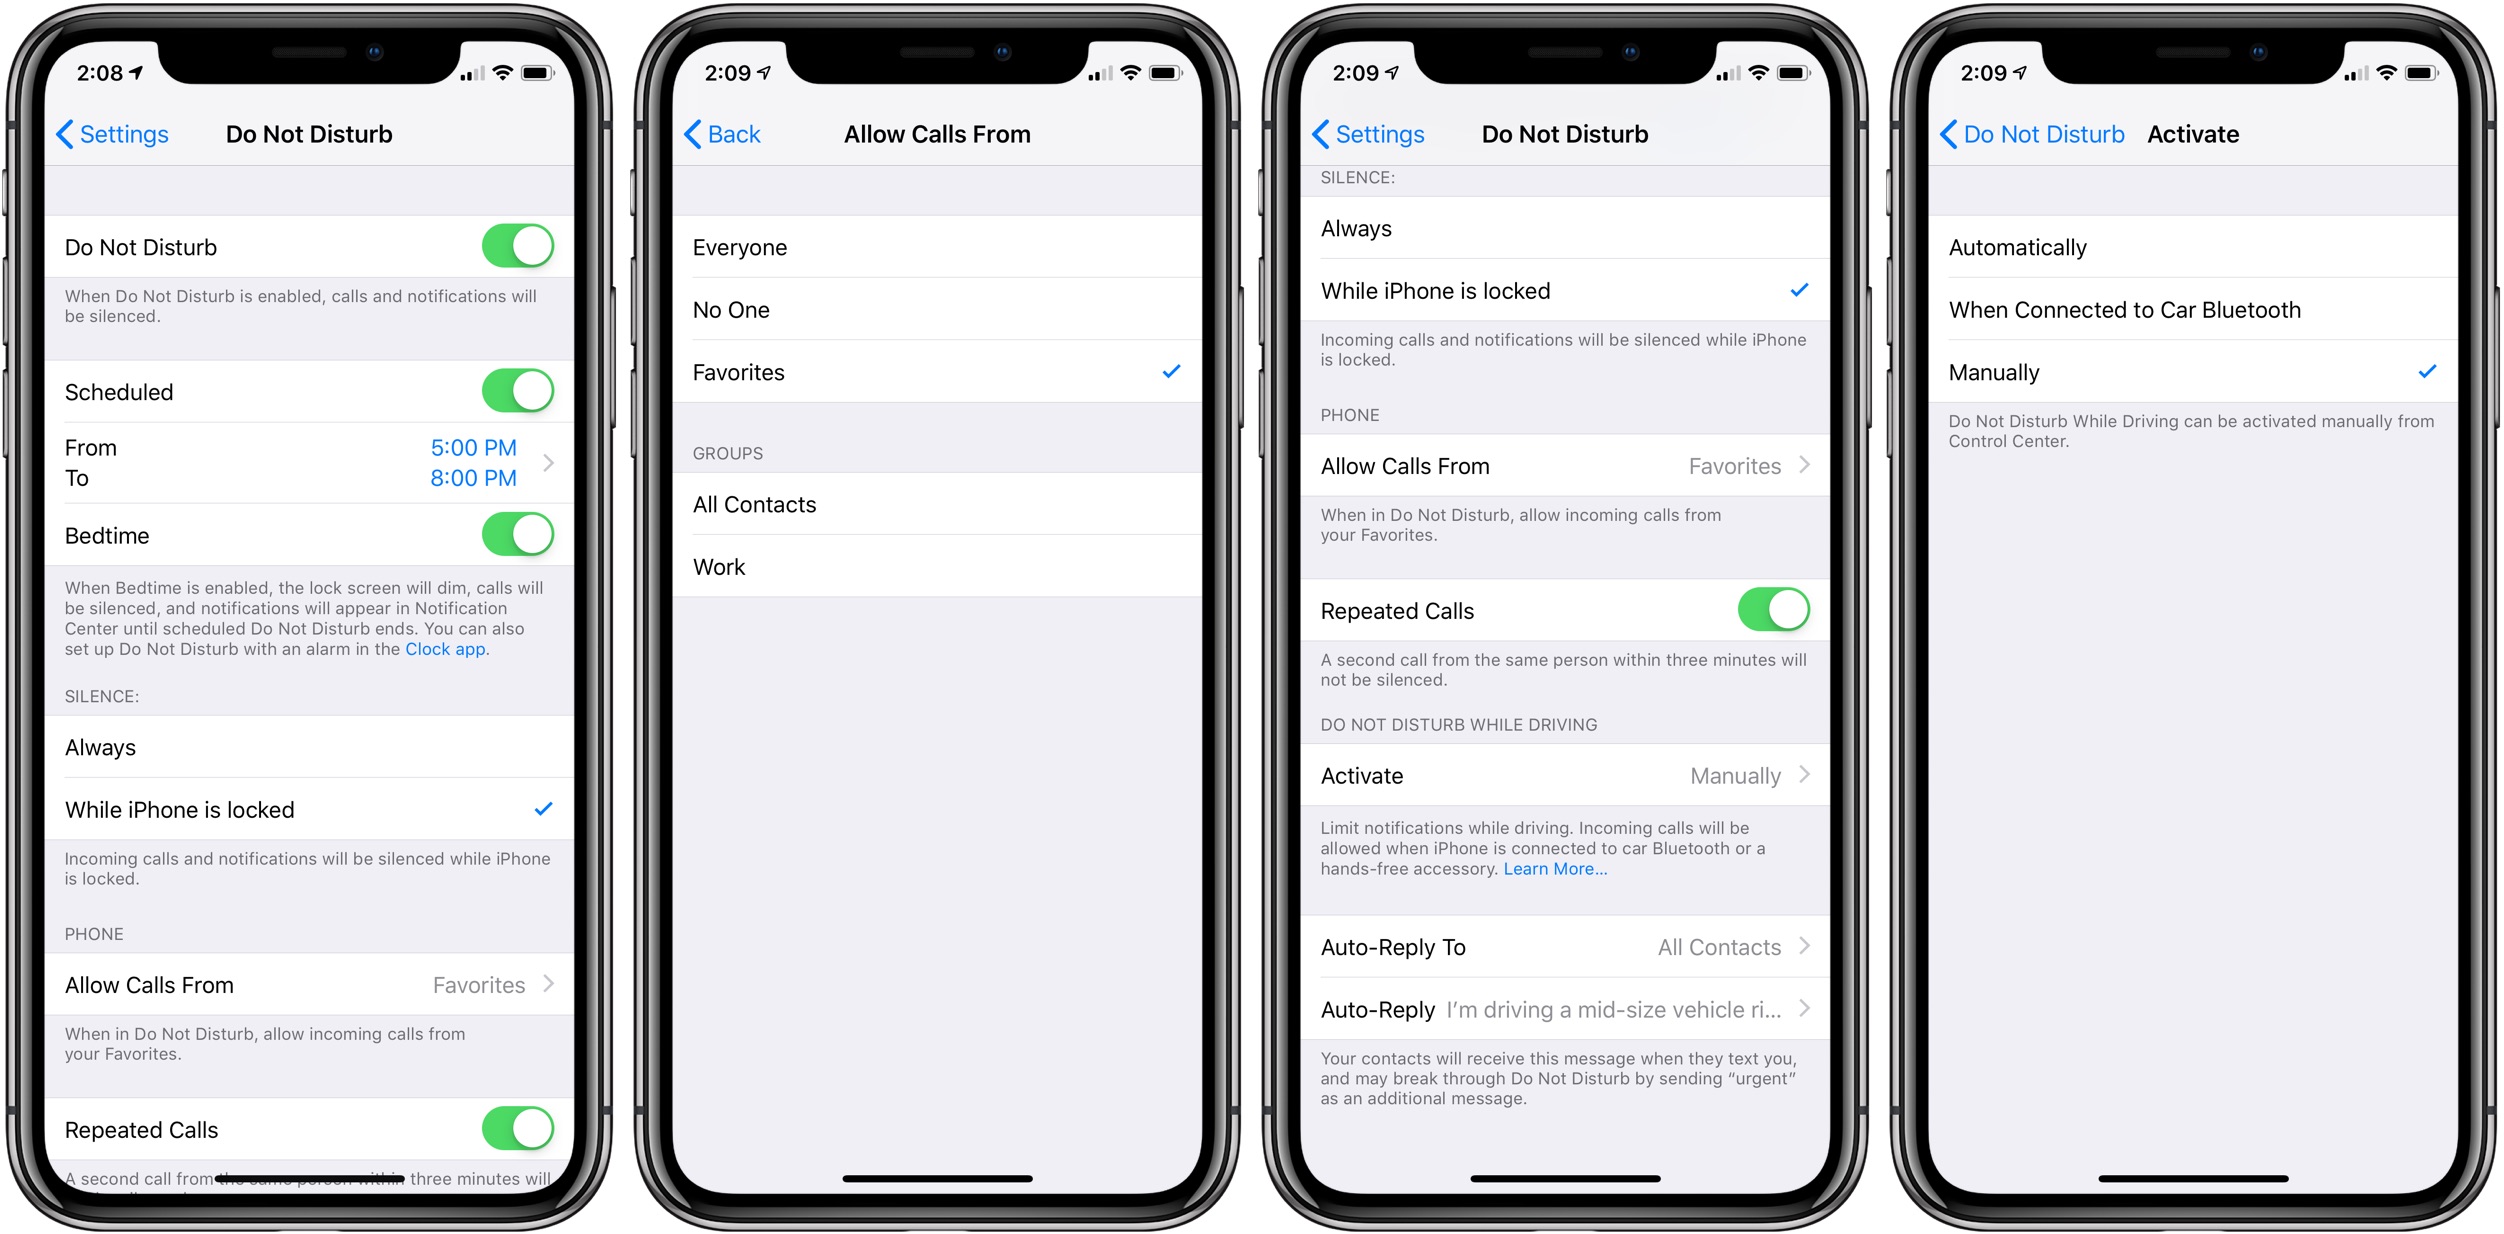 How to use Do Not Disturb on iPhone - 9to5Mac